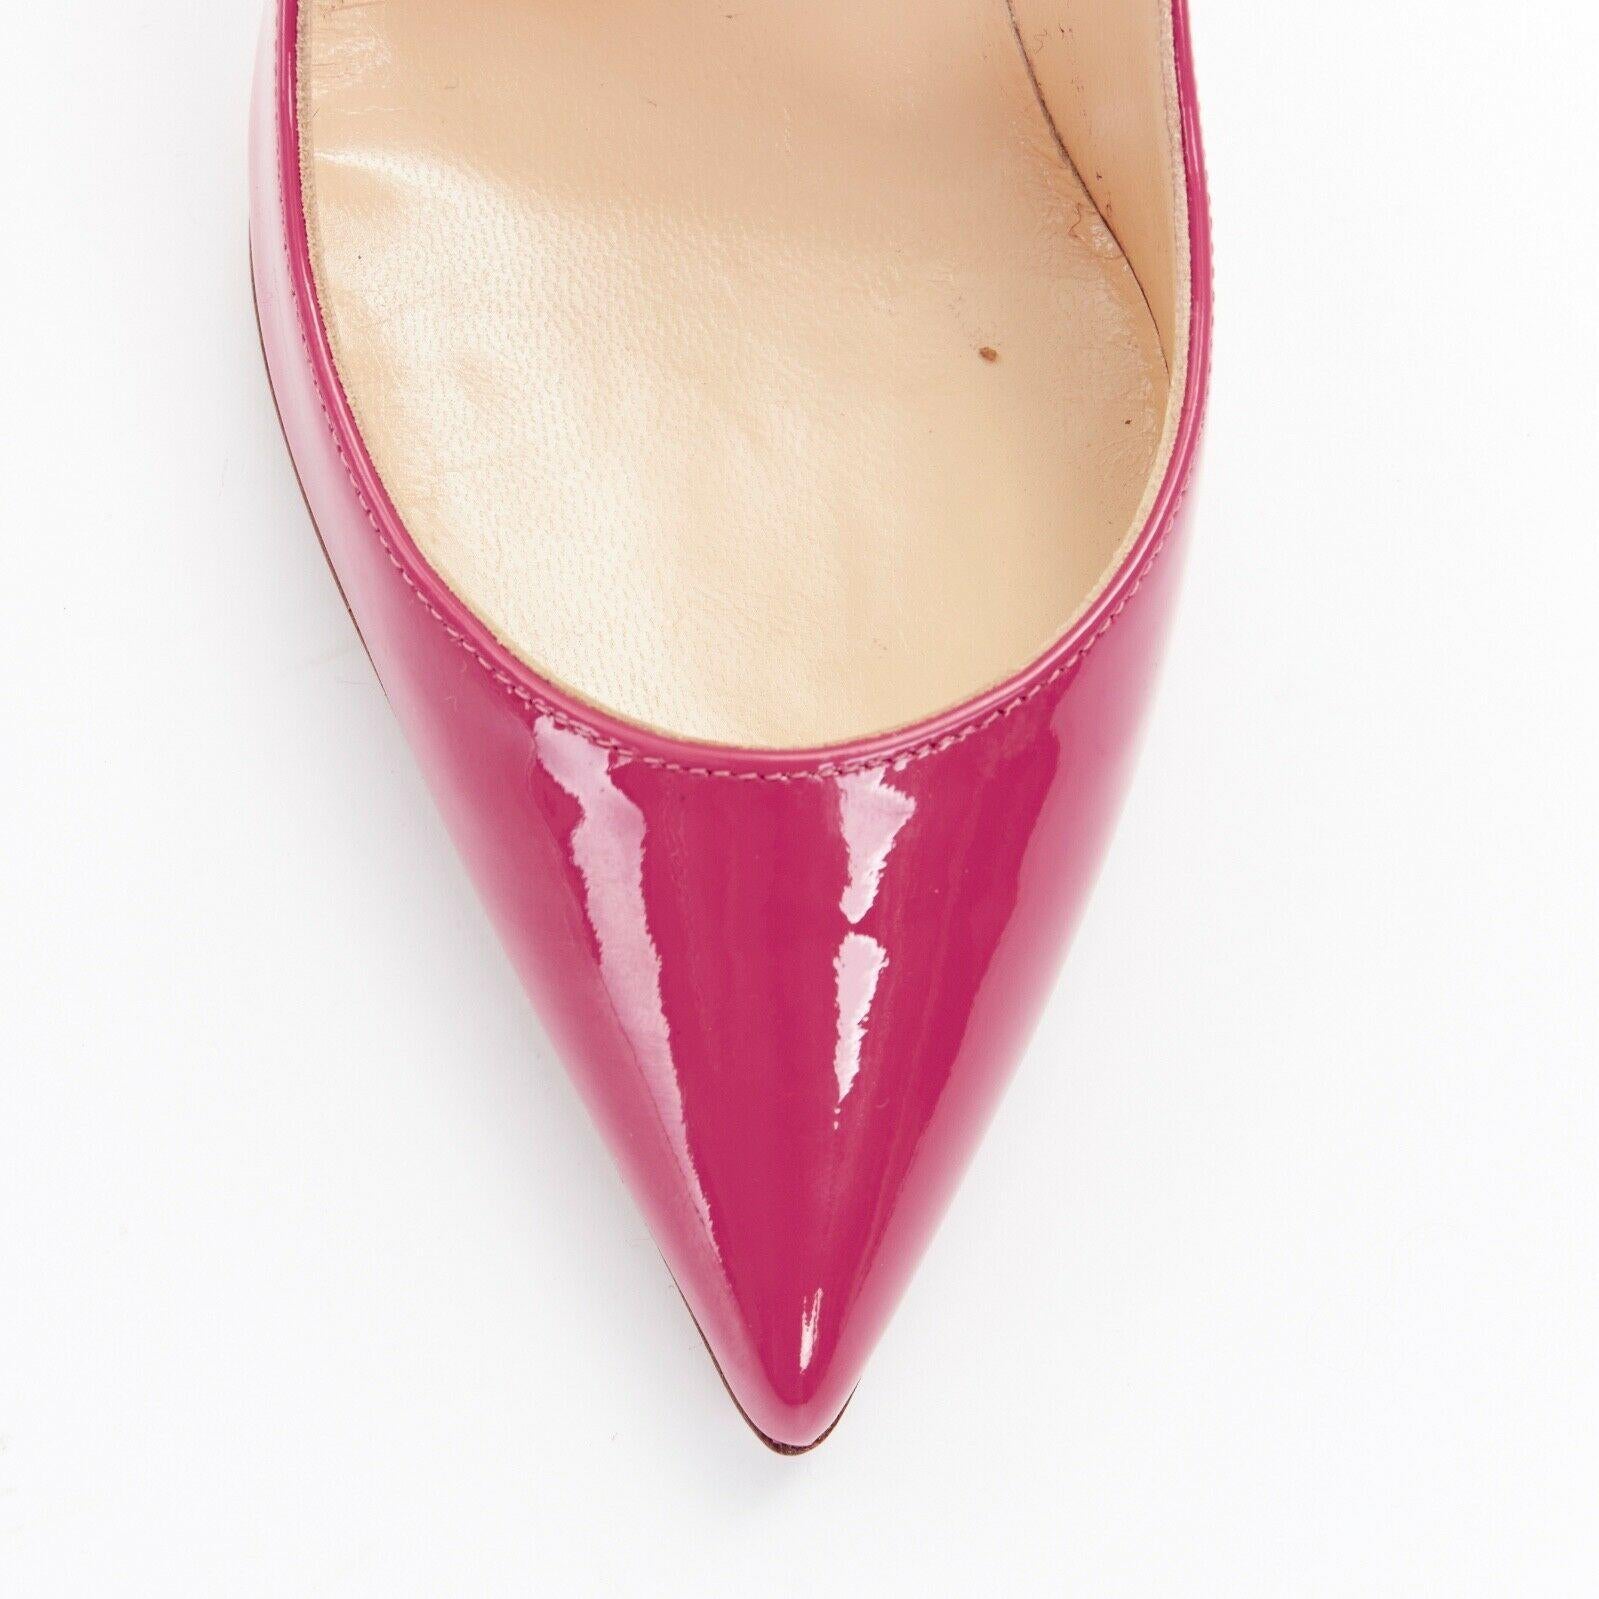 new CHRISTIAN LOUBOUTIN Pigalle Follies 100 pink patent pointed toe pumps EU37 2